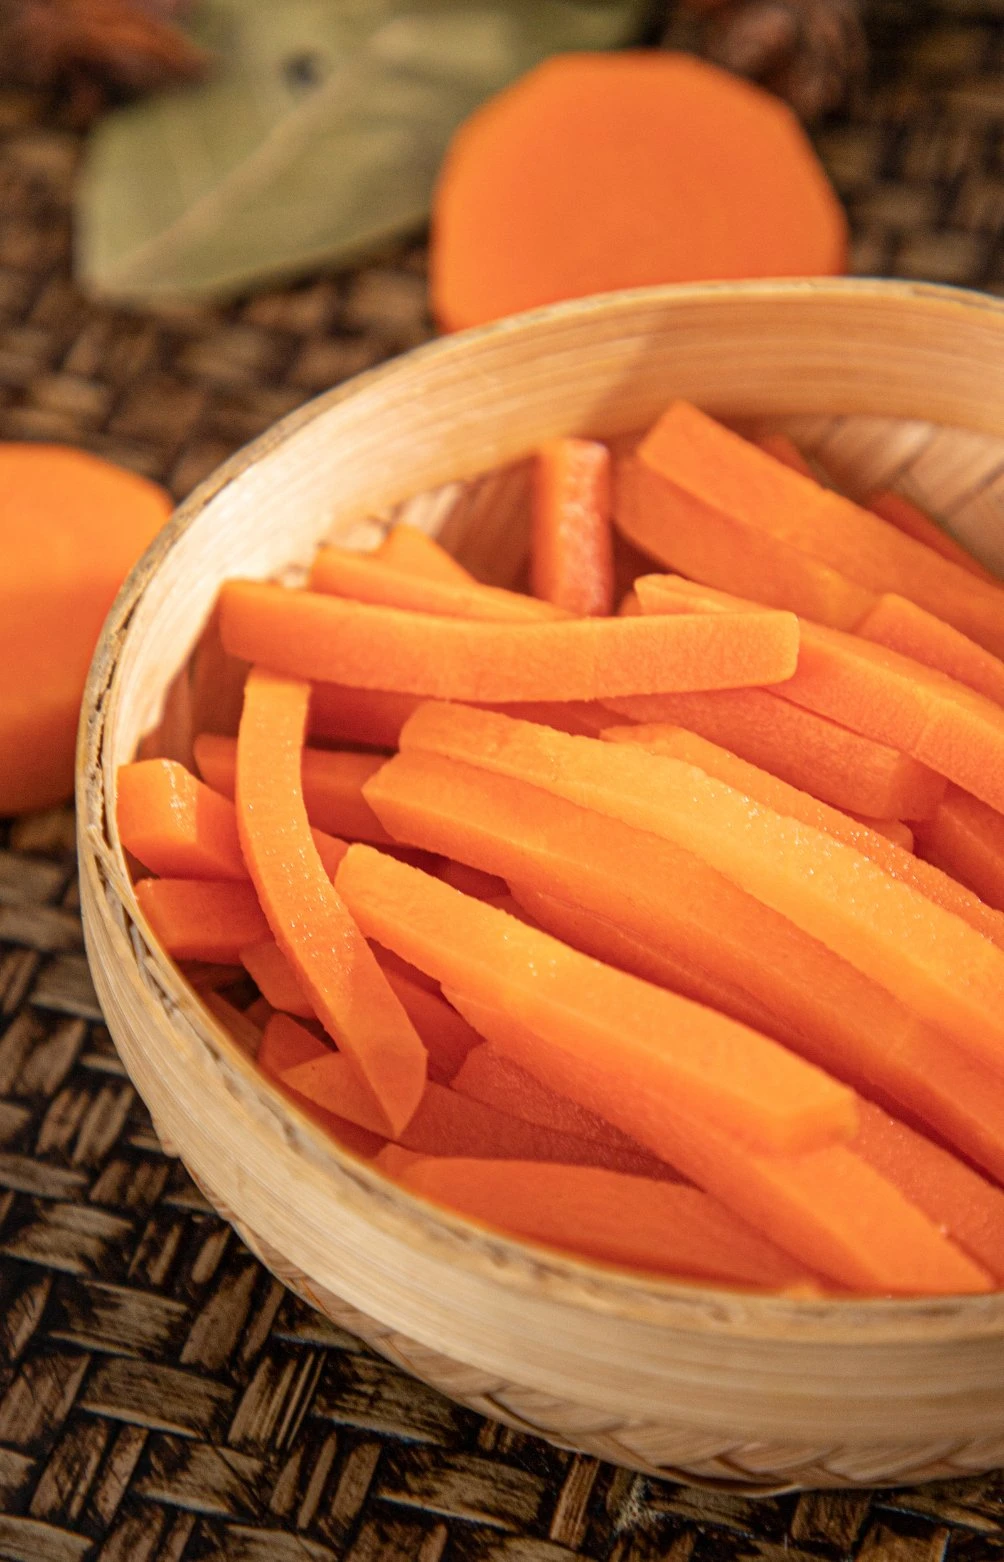 Frozen Carrots Slices, IQF Carrot Slices, IQF Sliced Carrots, Frozen Sliced Carrots